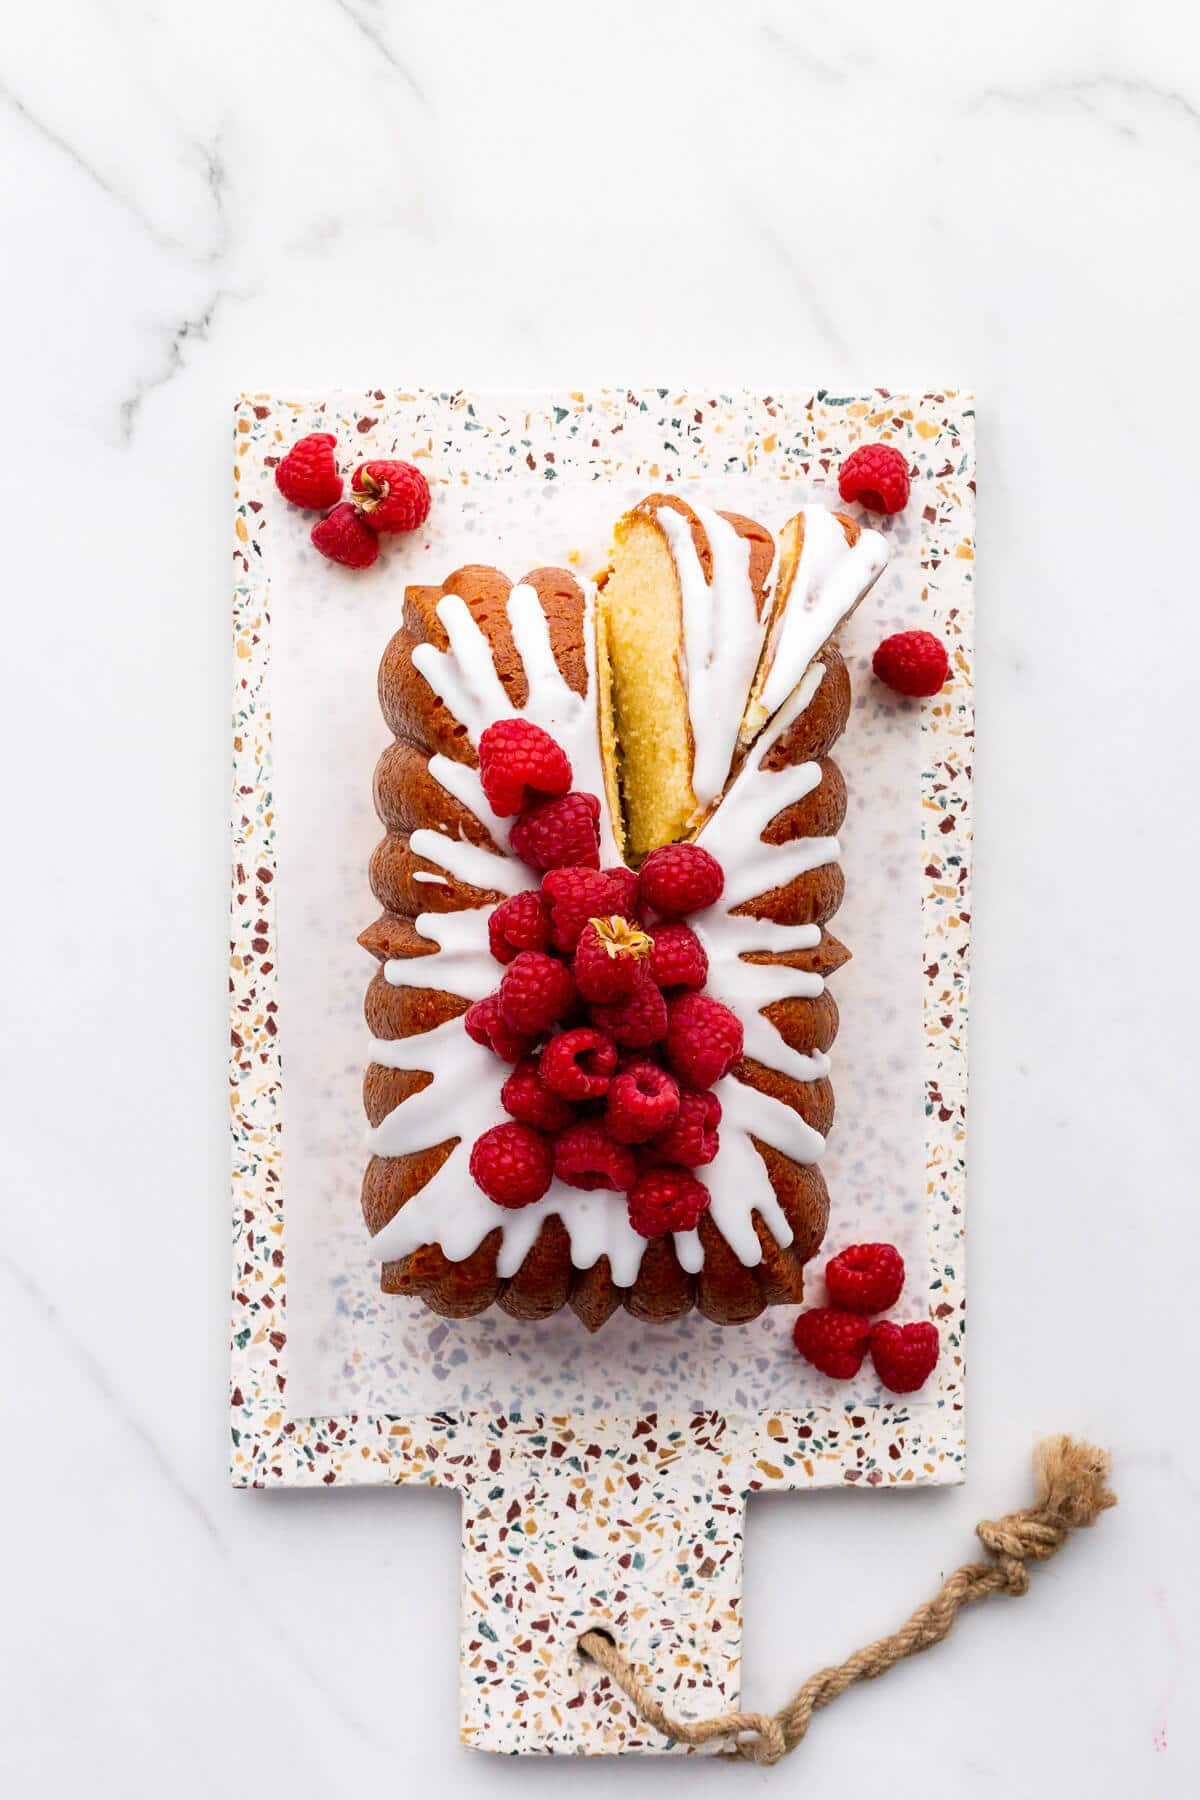 Lemon loaf cake topped with lemon icing and fresh raspberries being sliced to serve it